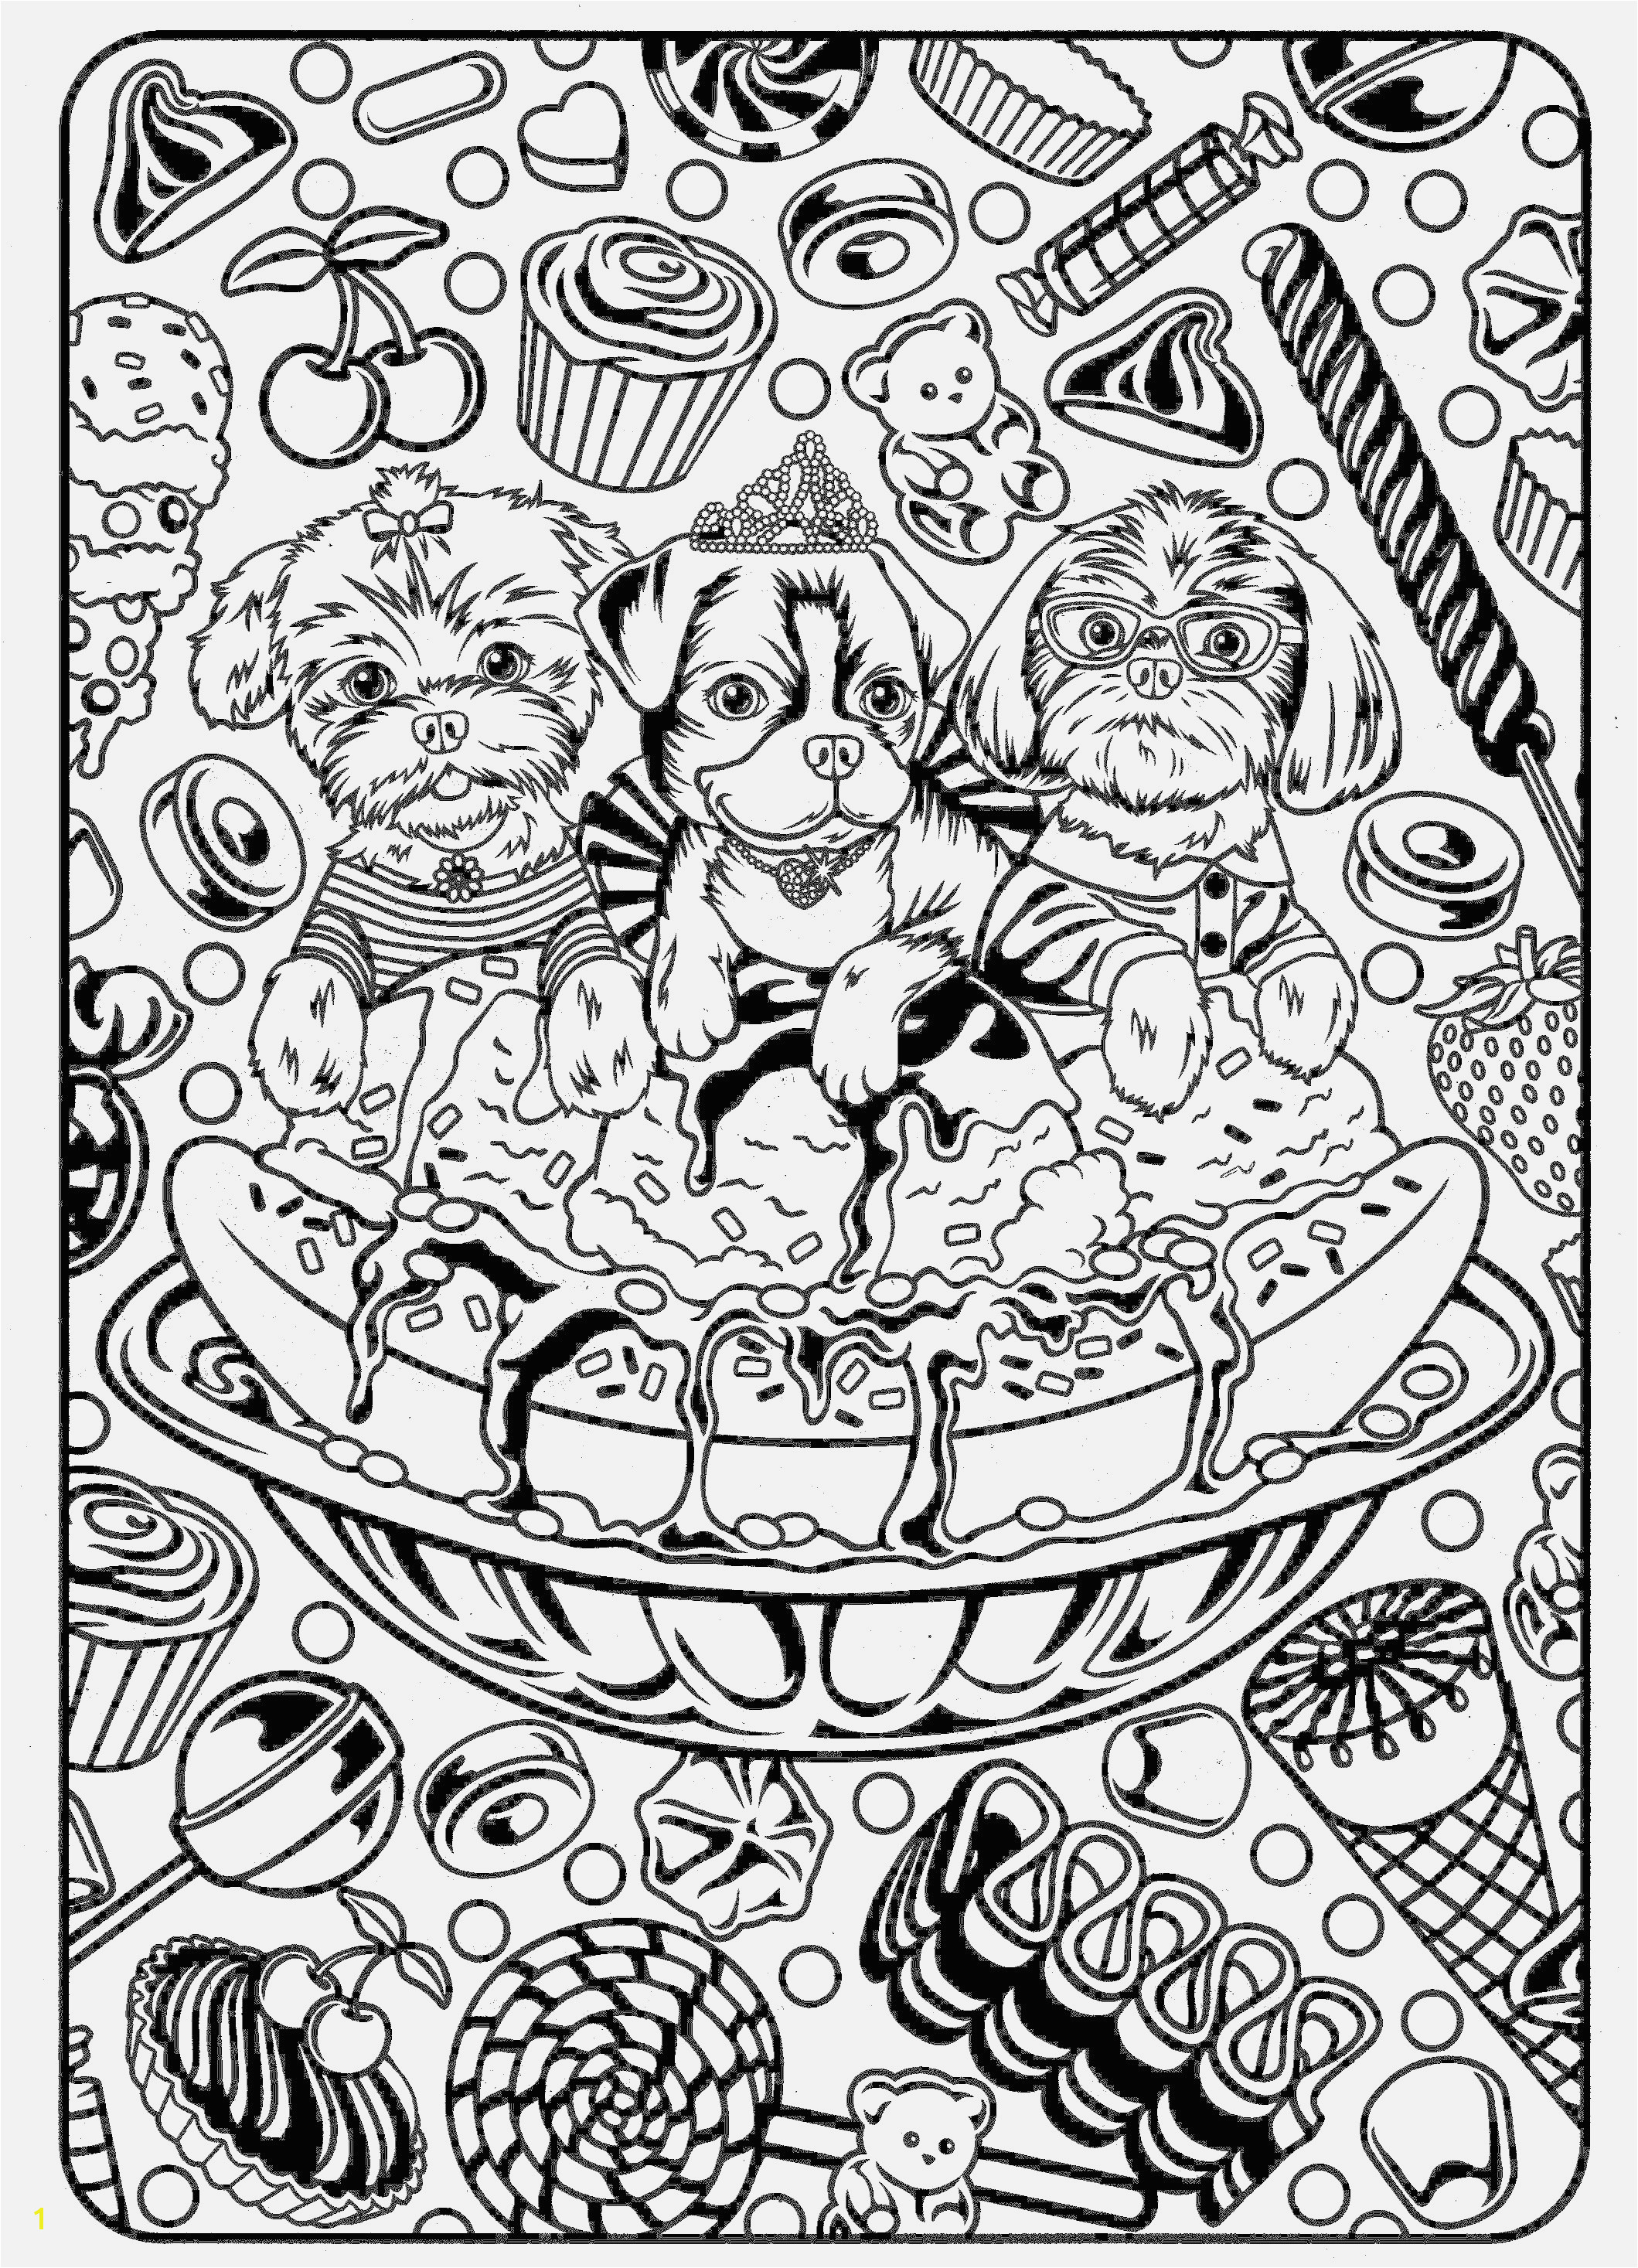 Duck Coloring Pages Free Download Coloring Pages Ducks Awesome Coloring Pages for Girls Lovely